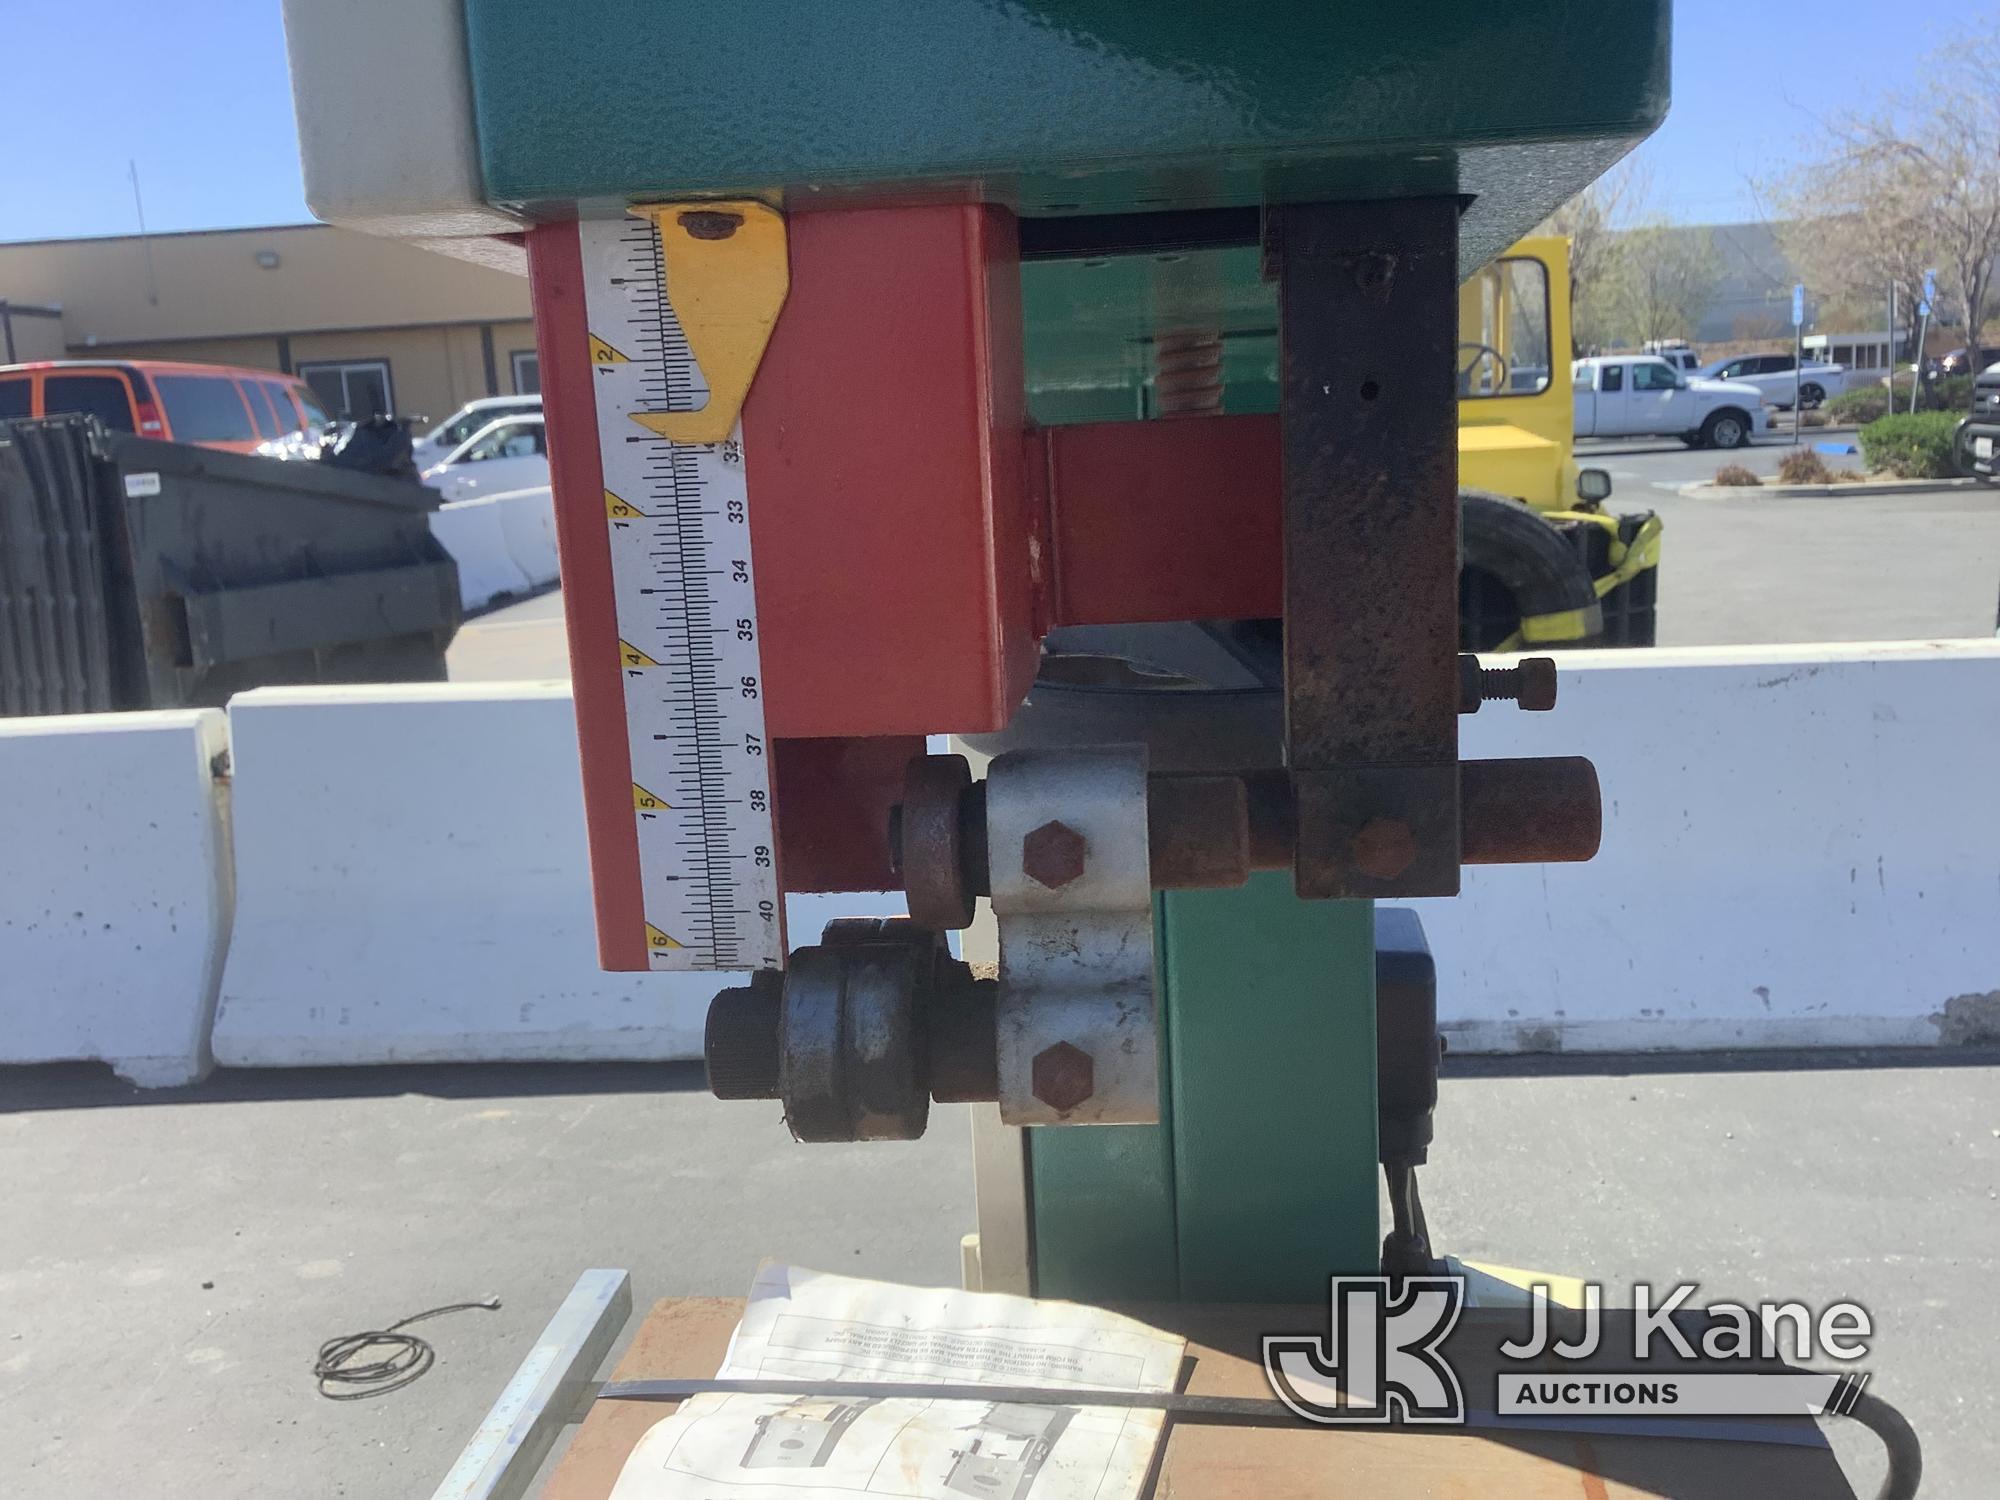 (Jurupa Valley, CA) 1 Grizzly Heavy Duty Bandsaw (Saw) NOTE: This unit is being sold AS IS/WHERE IS